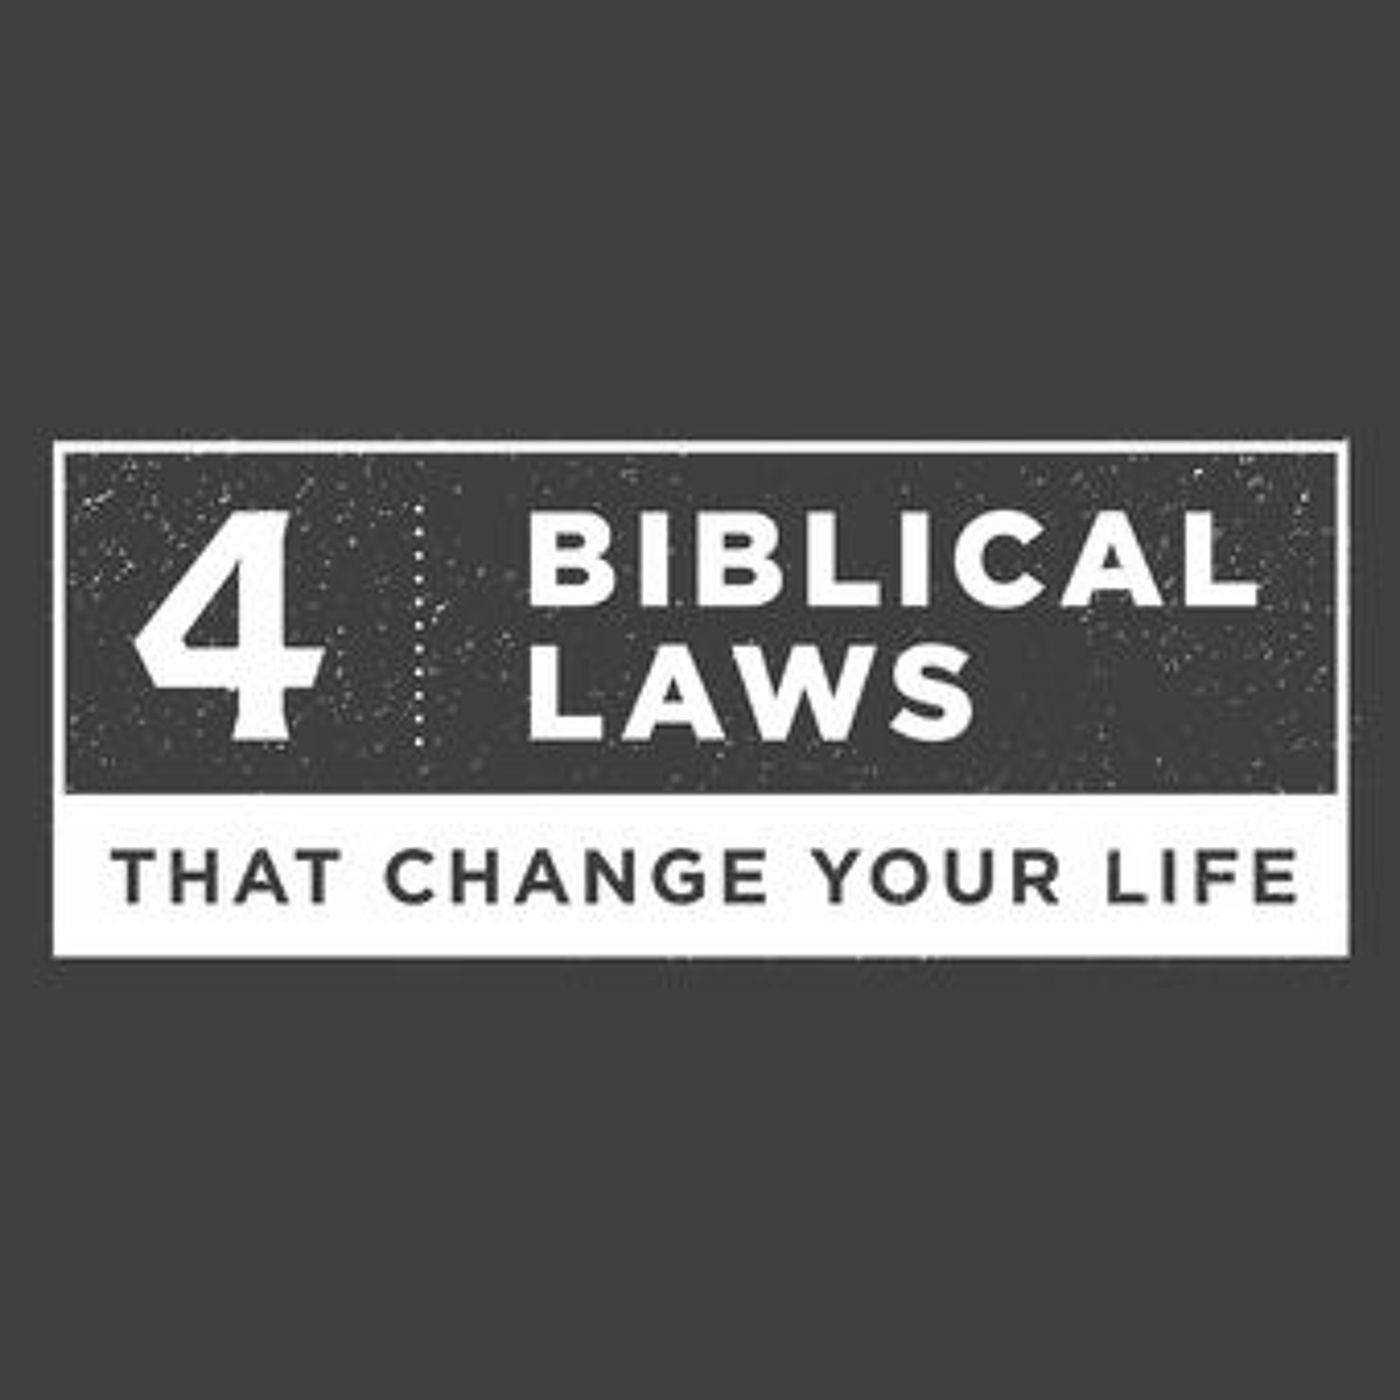 4 Biblical Laws #4 - The Law of Knowing God's Will